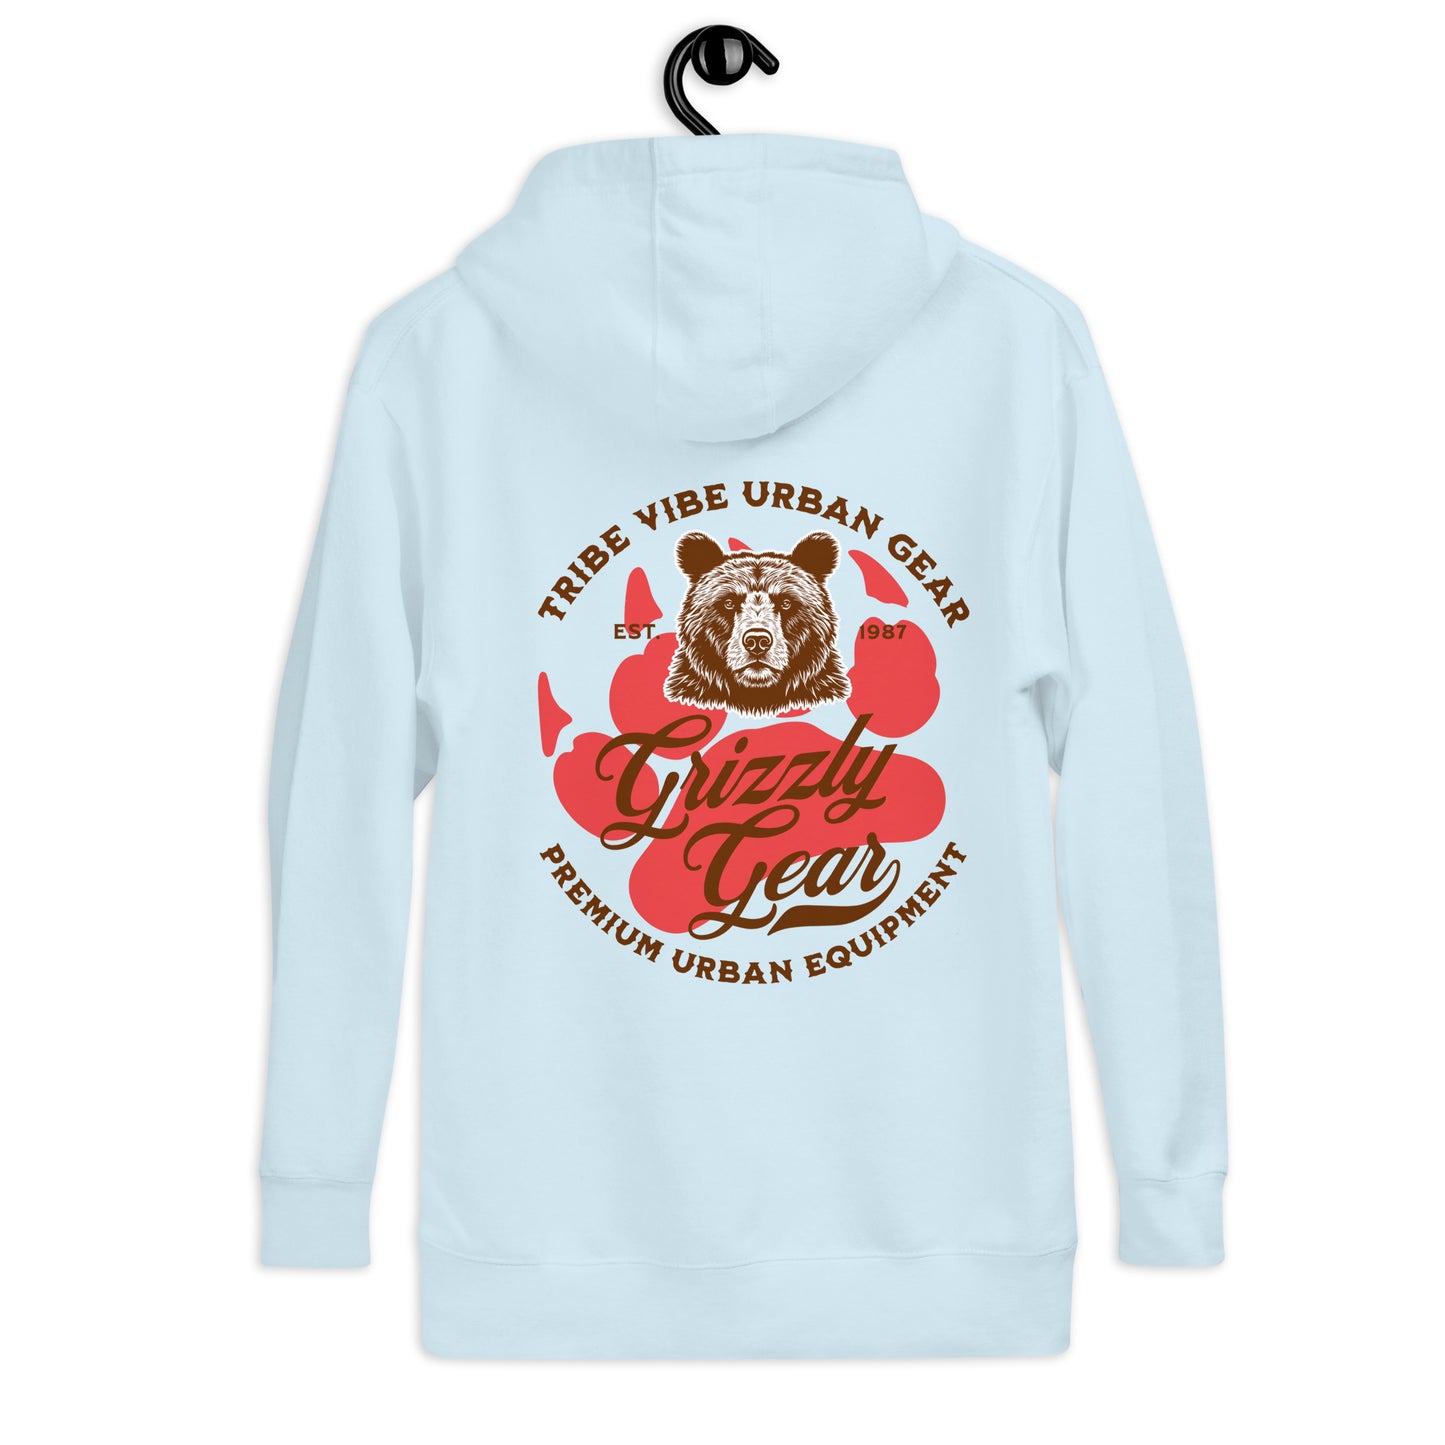 Grizzly Gear Unisex Hoodie